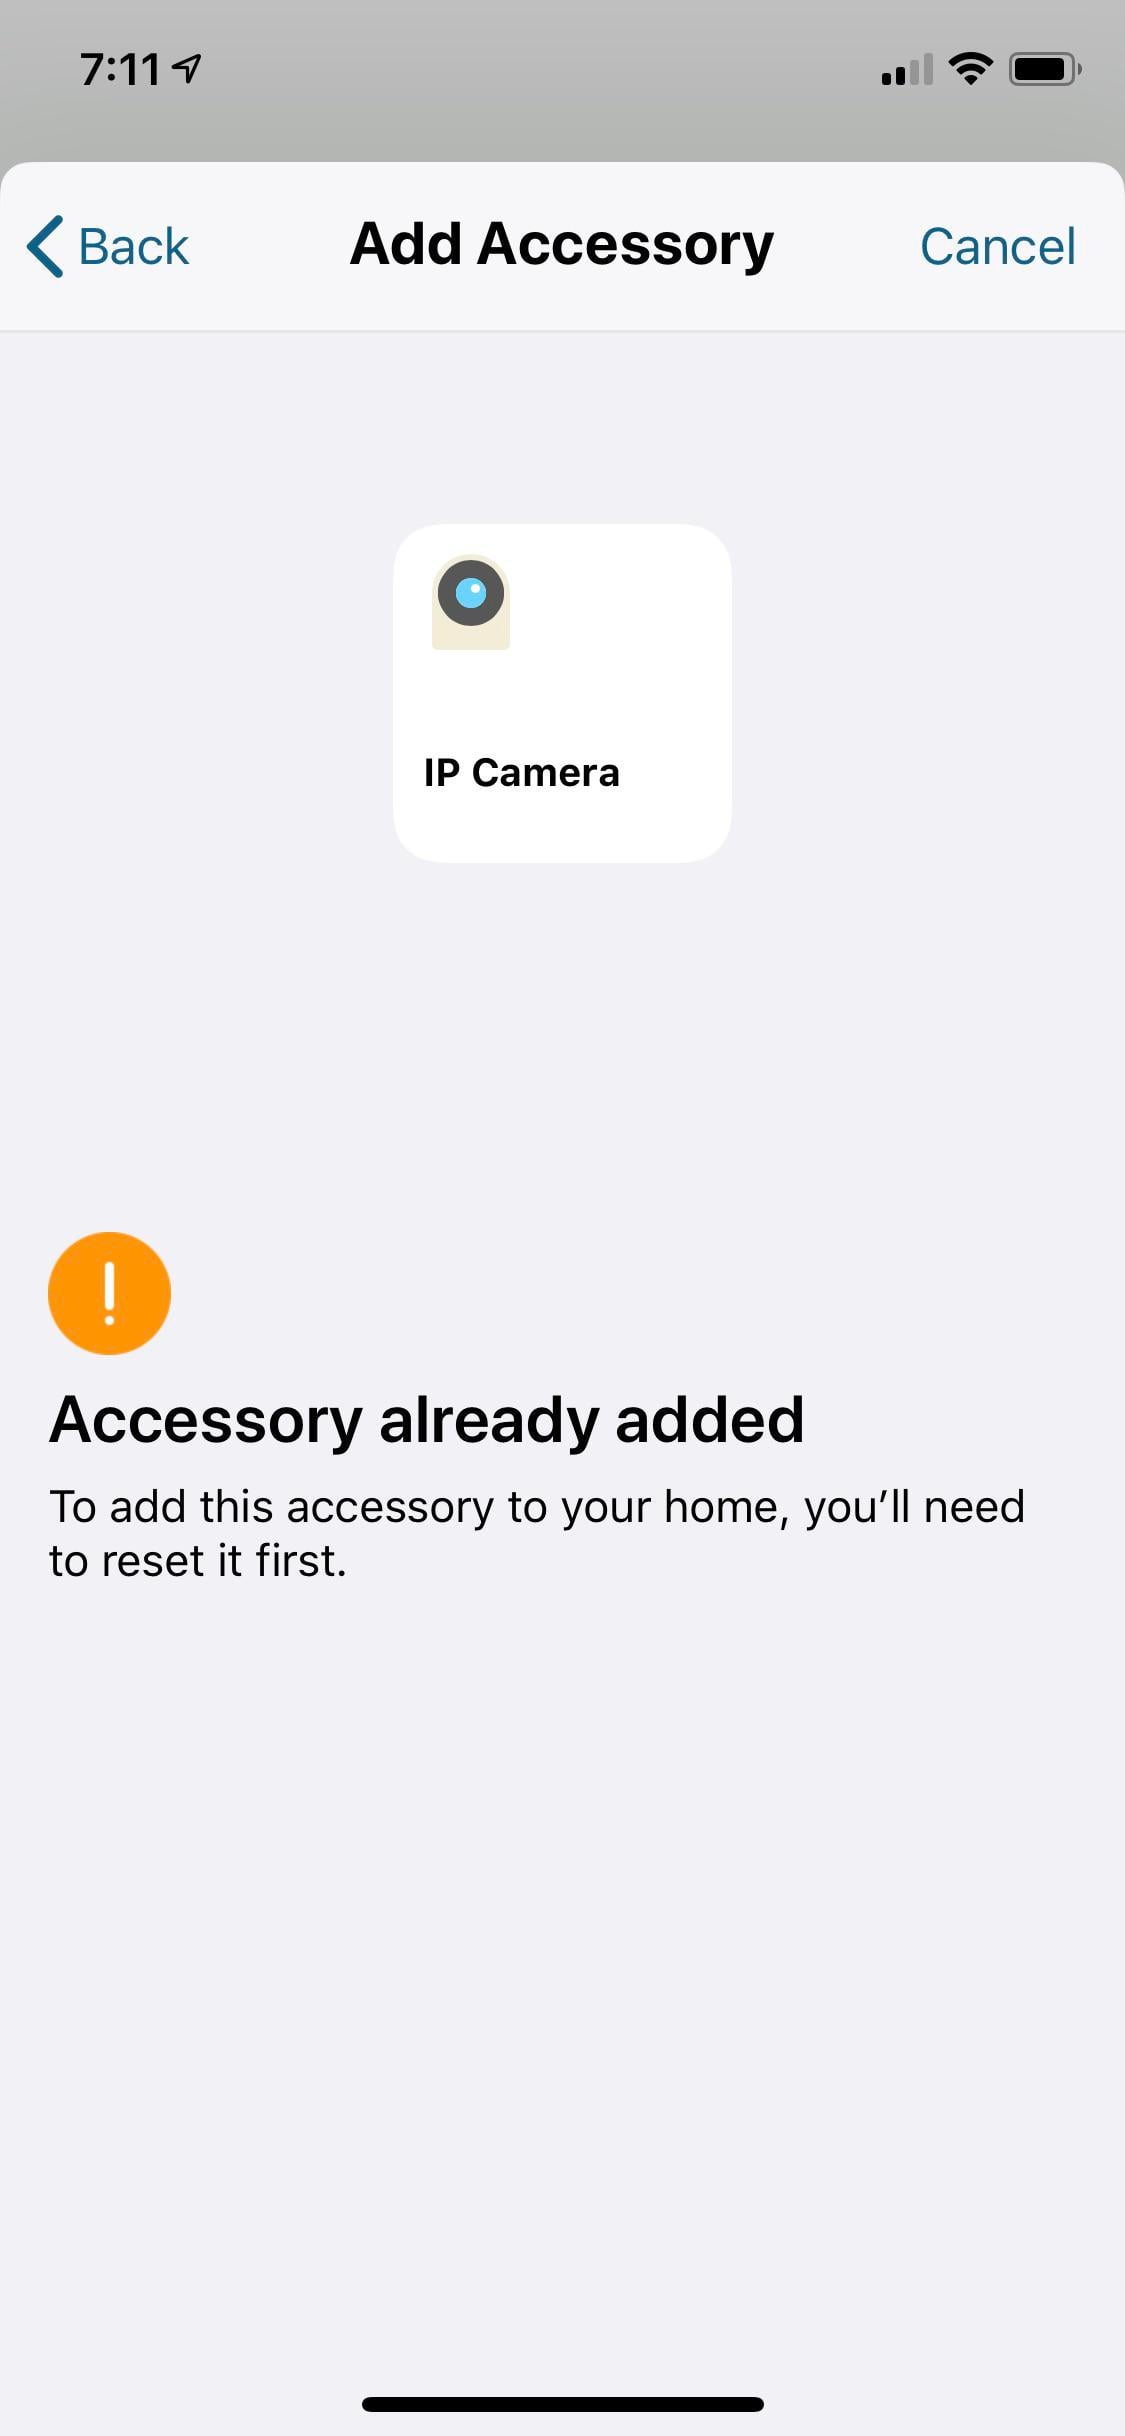 Unable to add Euphy Indoor Cam 2k to your home